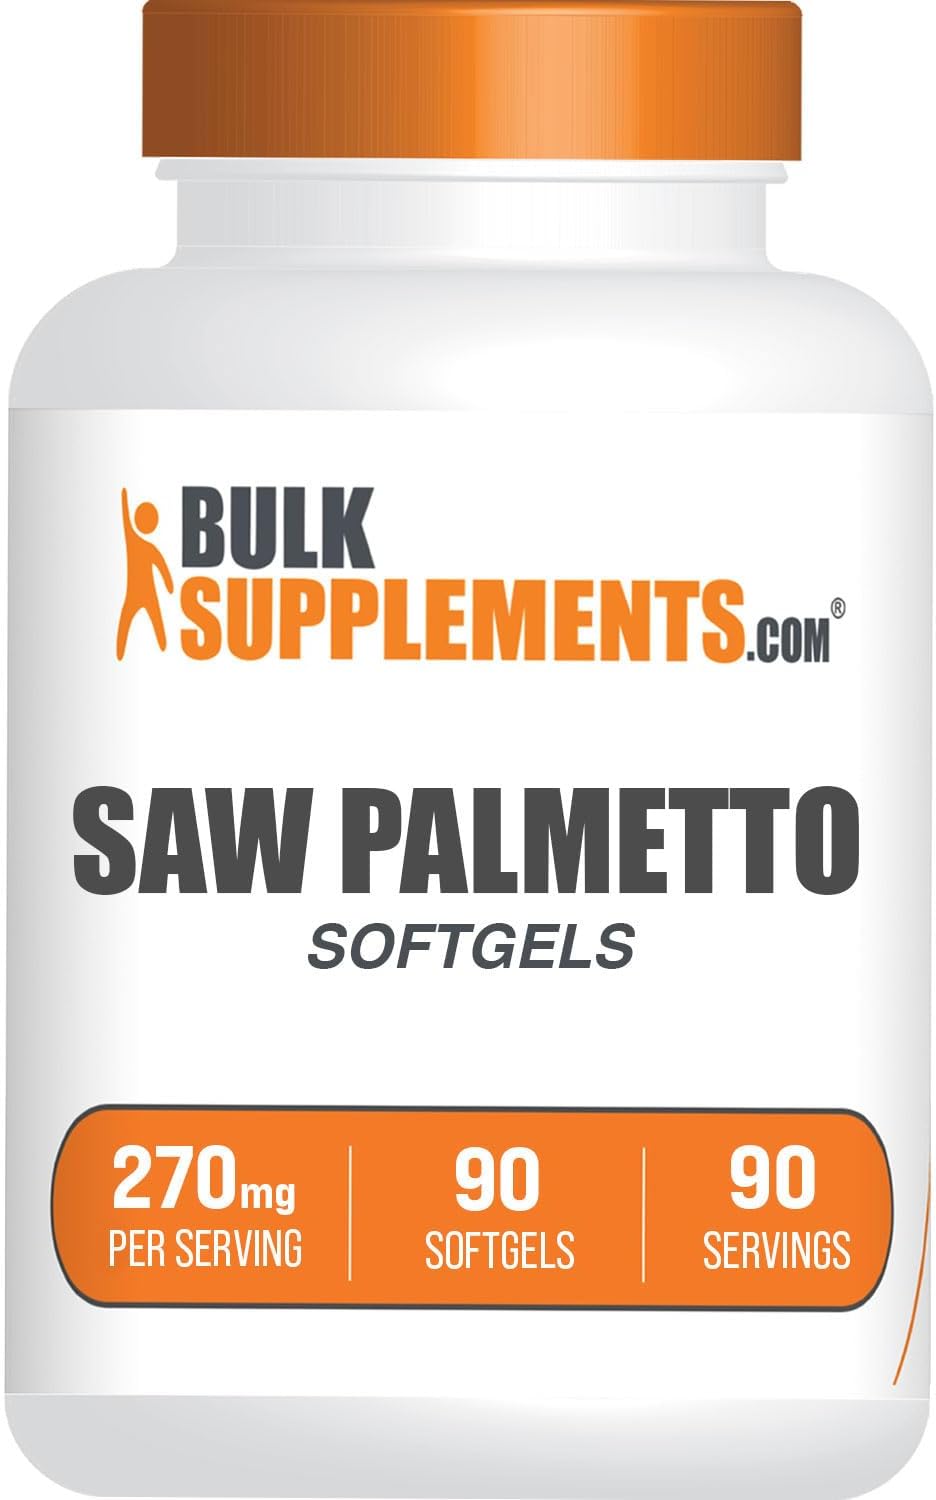 BulkSupplements.com Saw Palmetto Softgels - Saw Palmetto Extract - Saw Palmetto for Men - Saw Palmetto for Women - 1 Saw Palmetto 270 mg Softgels per Serving - 90-Day Supply (90 Softgels)